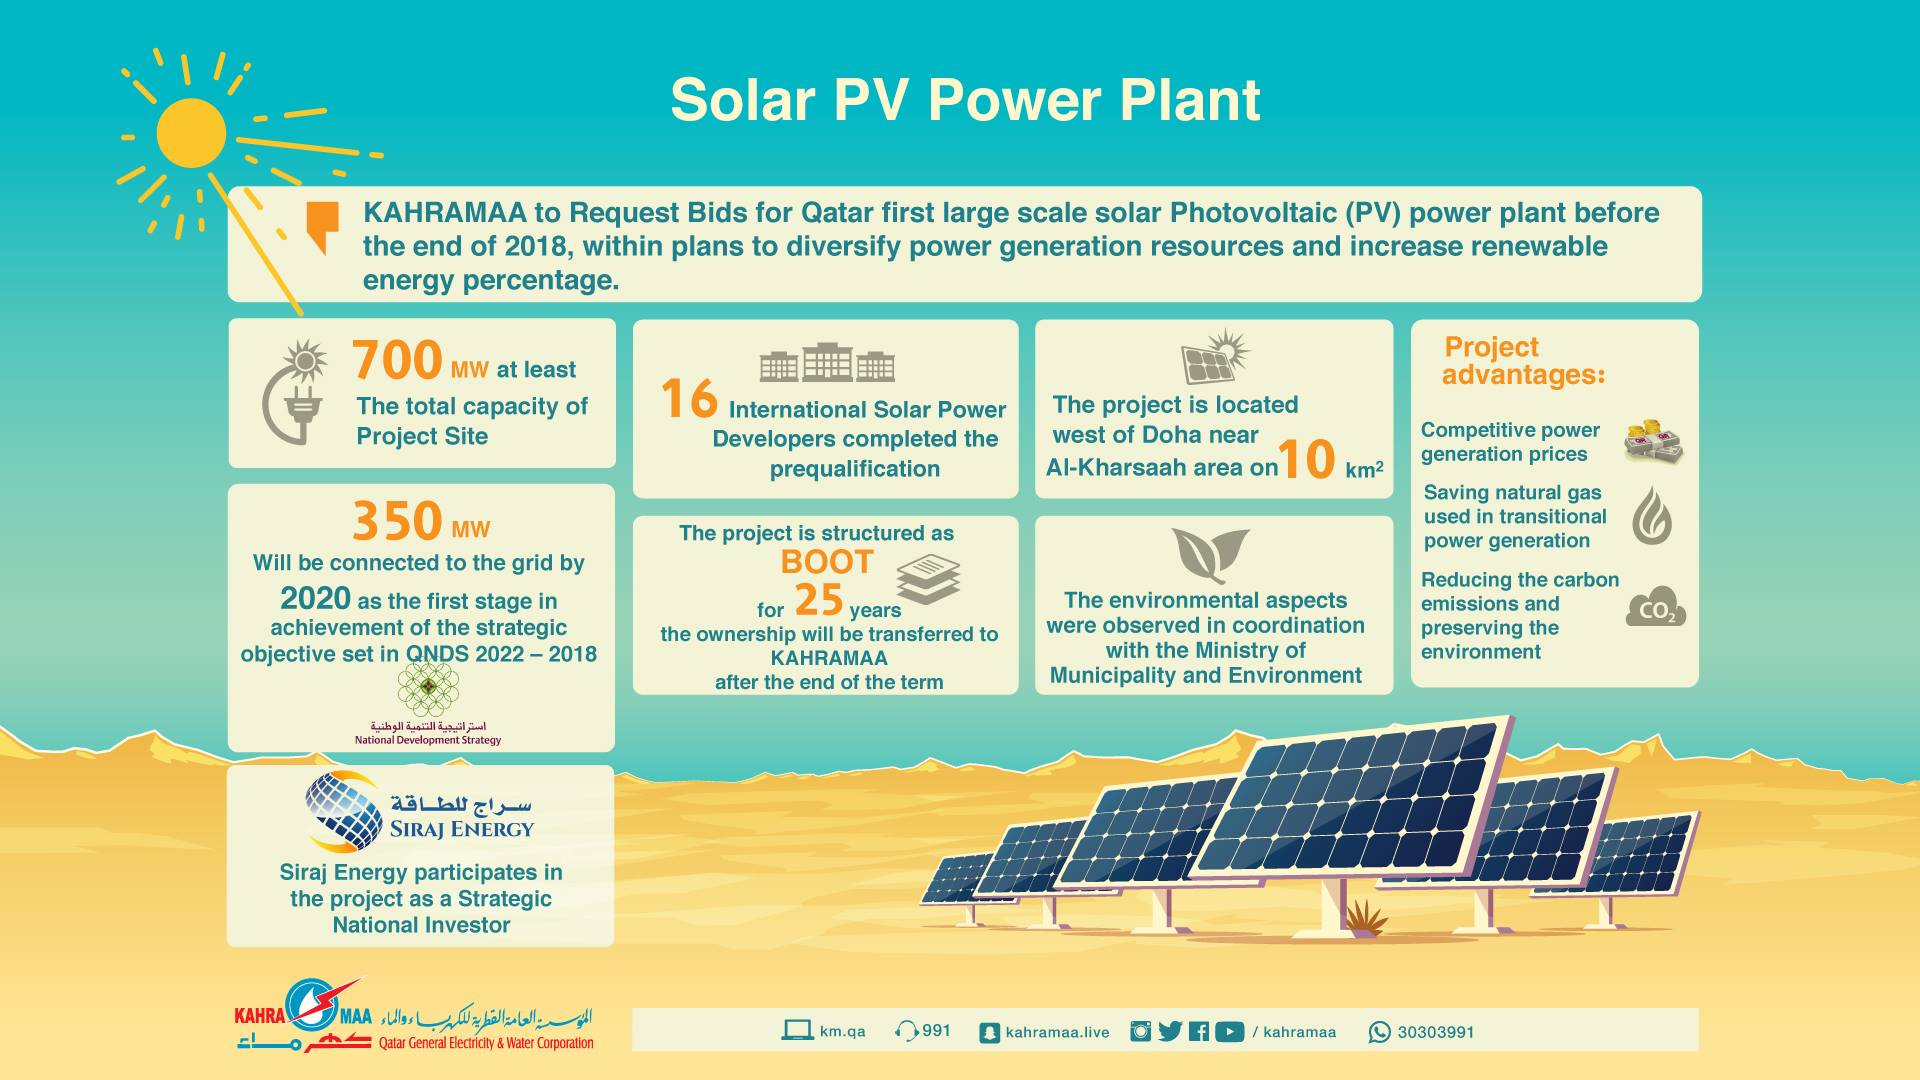 First of kind in Qatar: KAHRAMAA request Bids for large scale solar Photovoltaic (PV) power plant